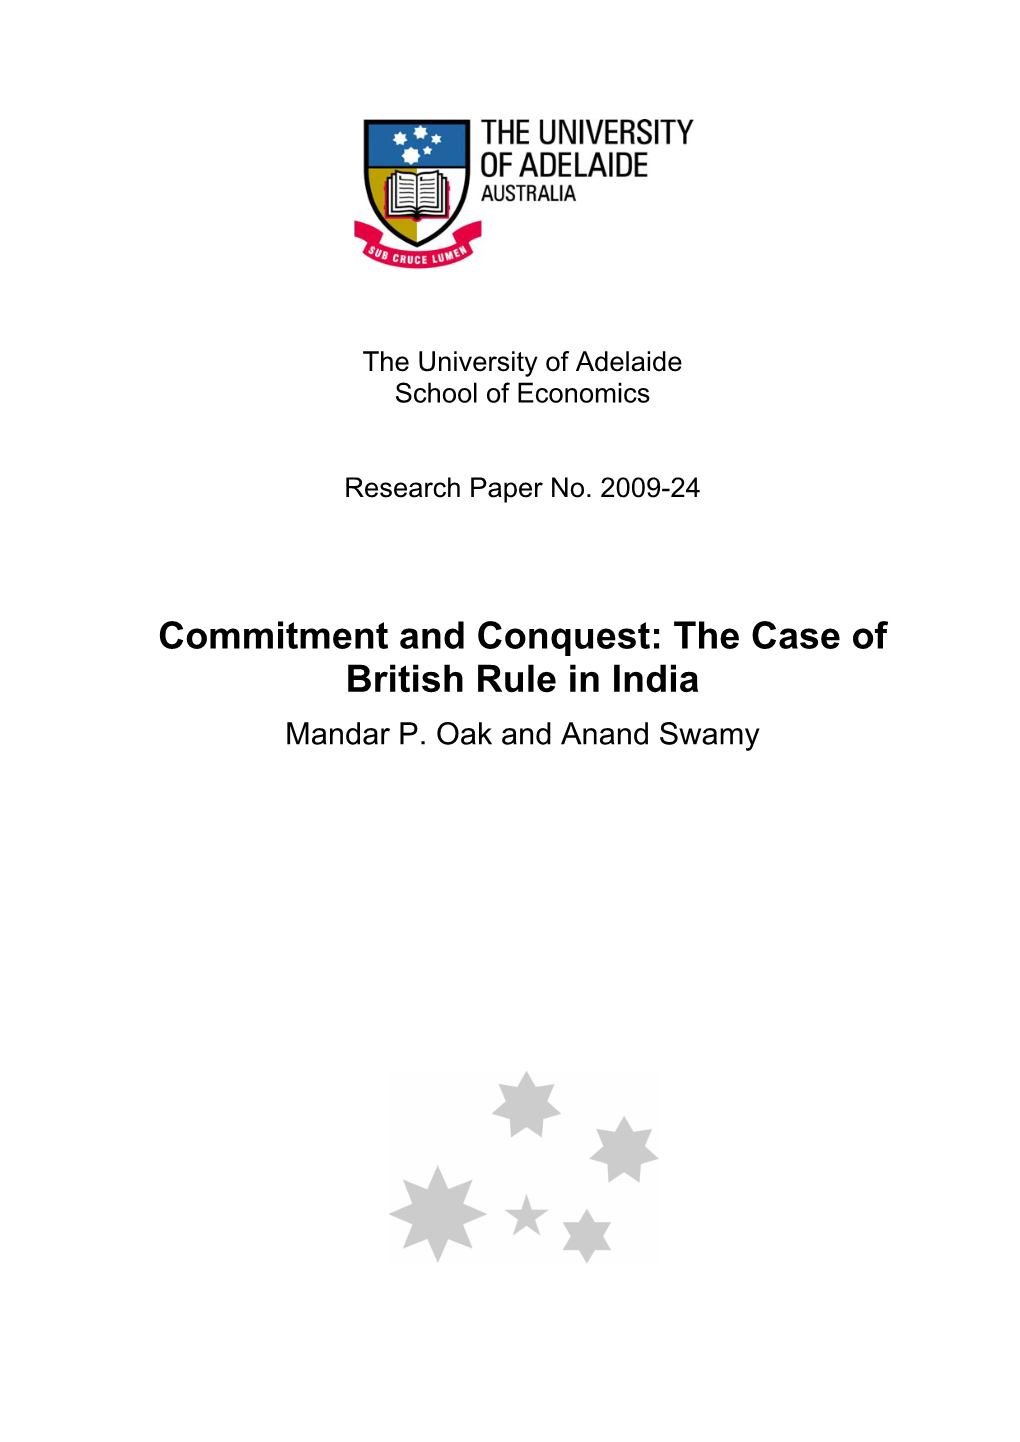 Commitment and Conquest: the Case of British Rule in India